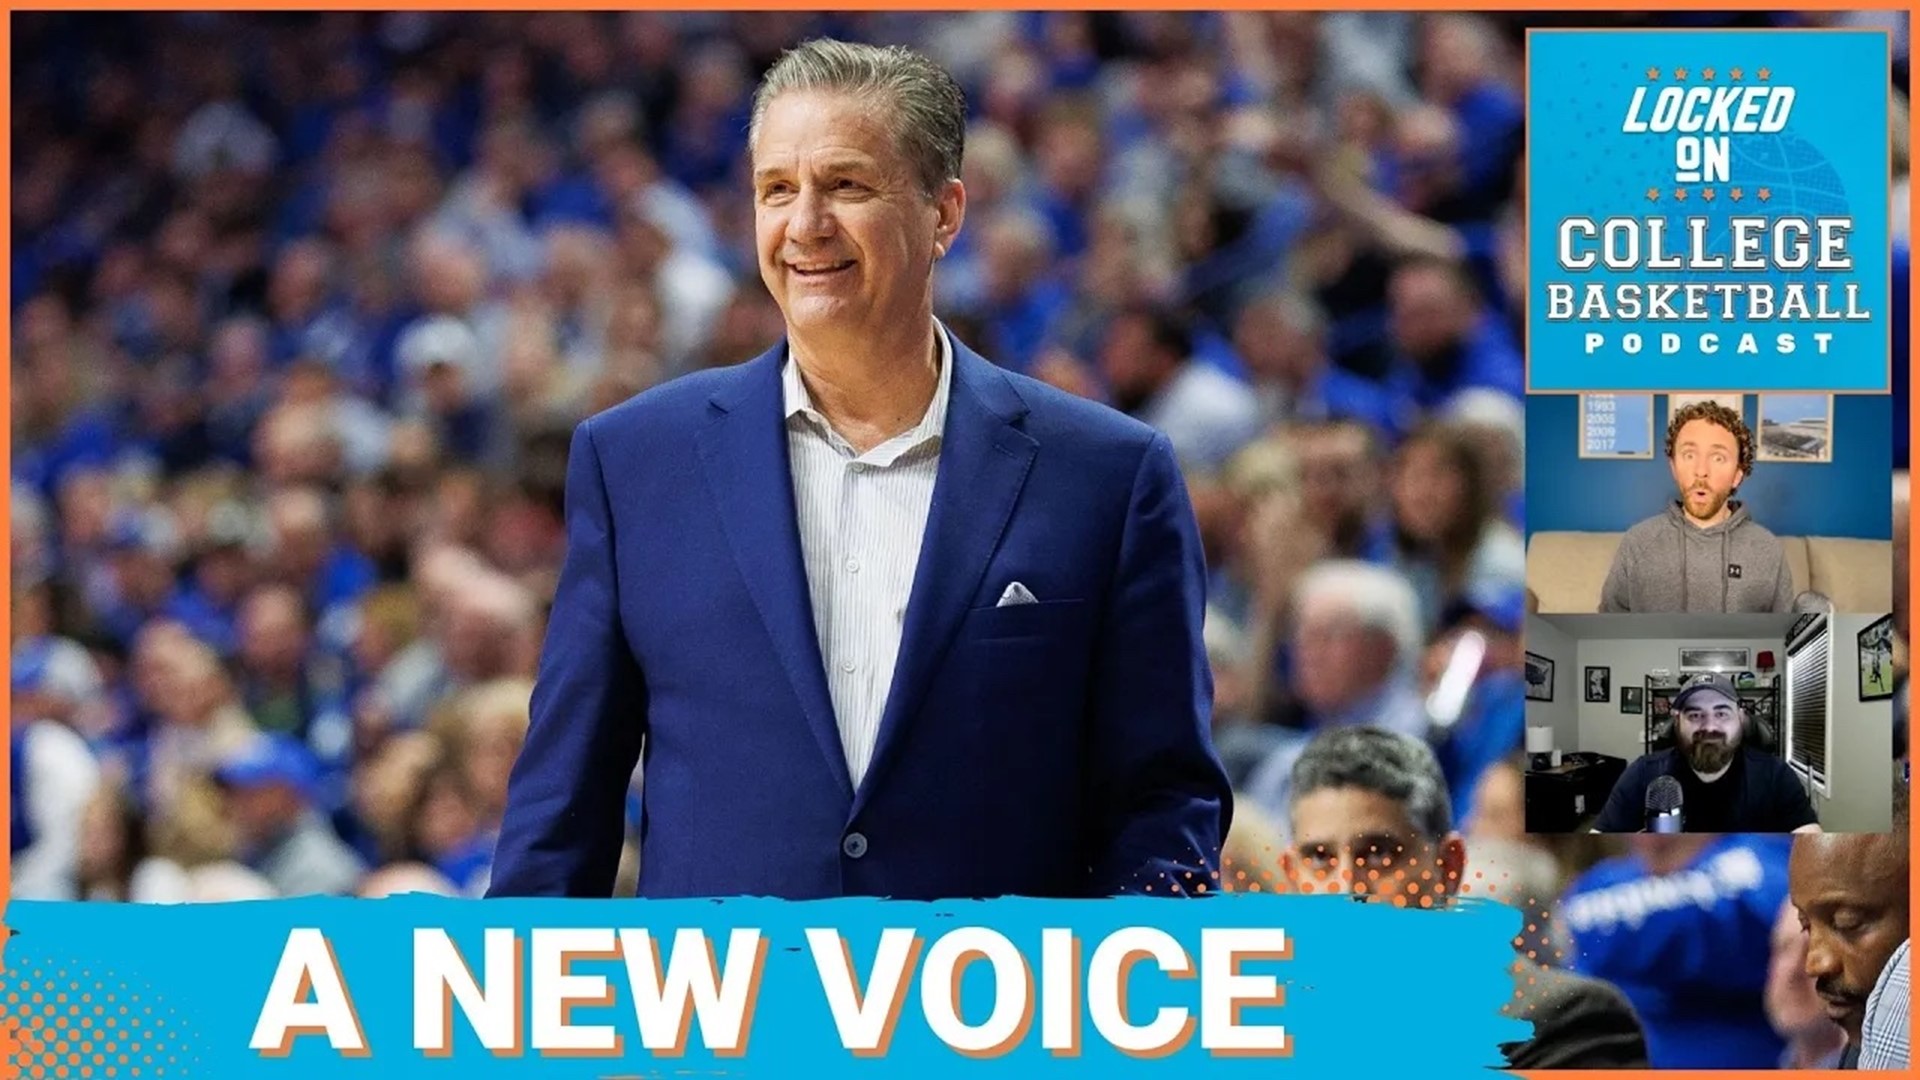 On Tuesday, John Calipari made it official that he was stepping away as the head coach of the Kentucky Wildcats while saying that it was time for a new voice.